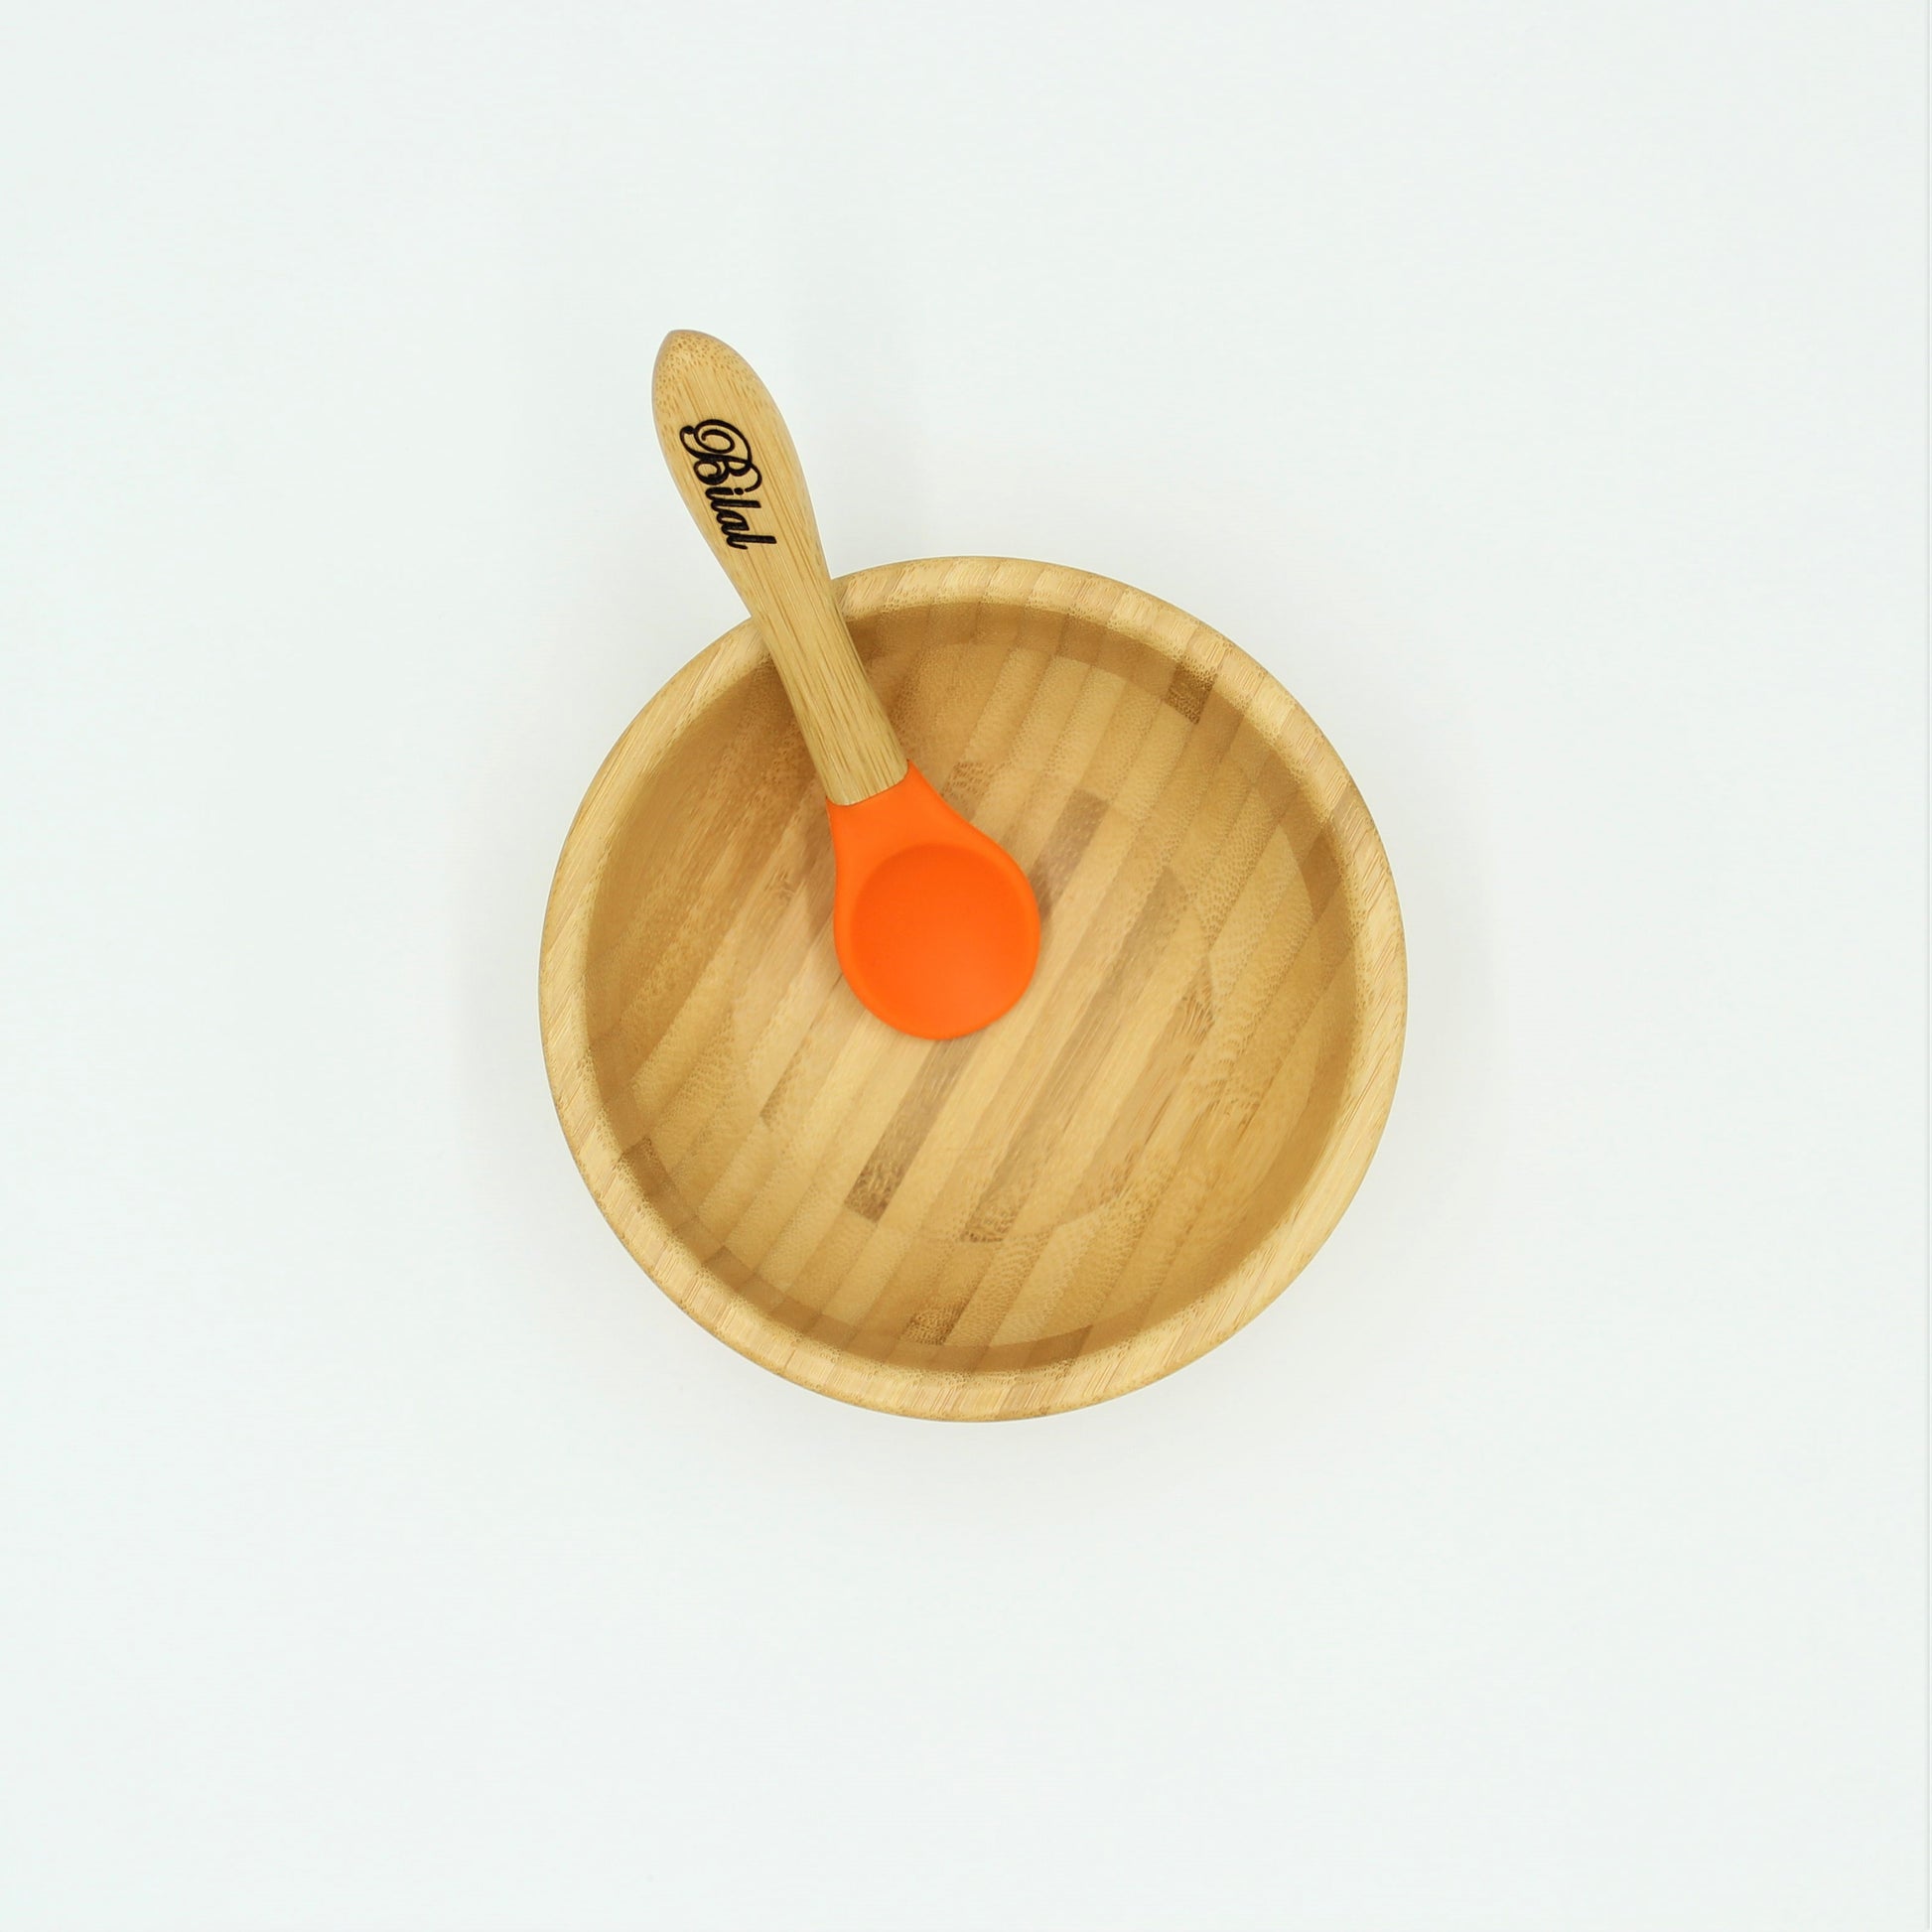 Personalised Wooden Tiny Dining  Bamboo Bowl with suction cup and Spoon- Orange - By Babba Box | Babba box.